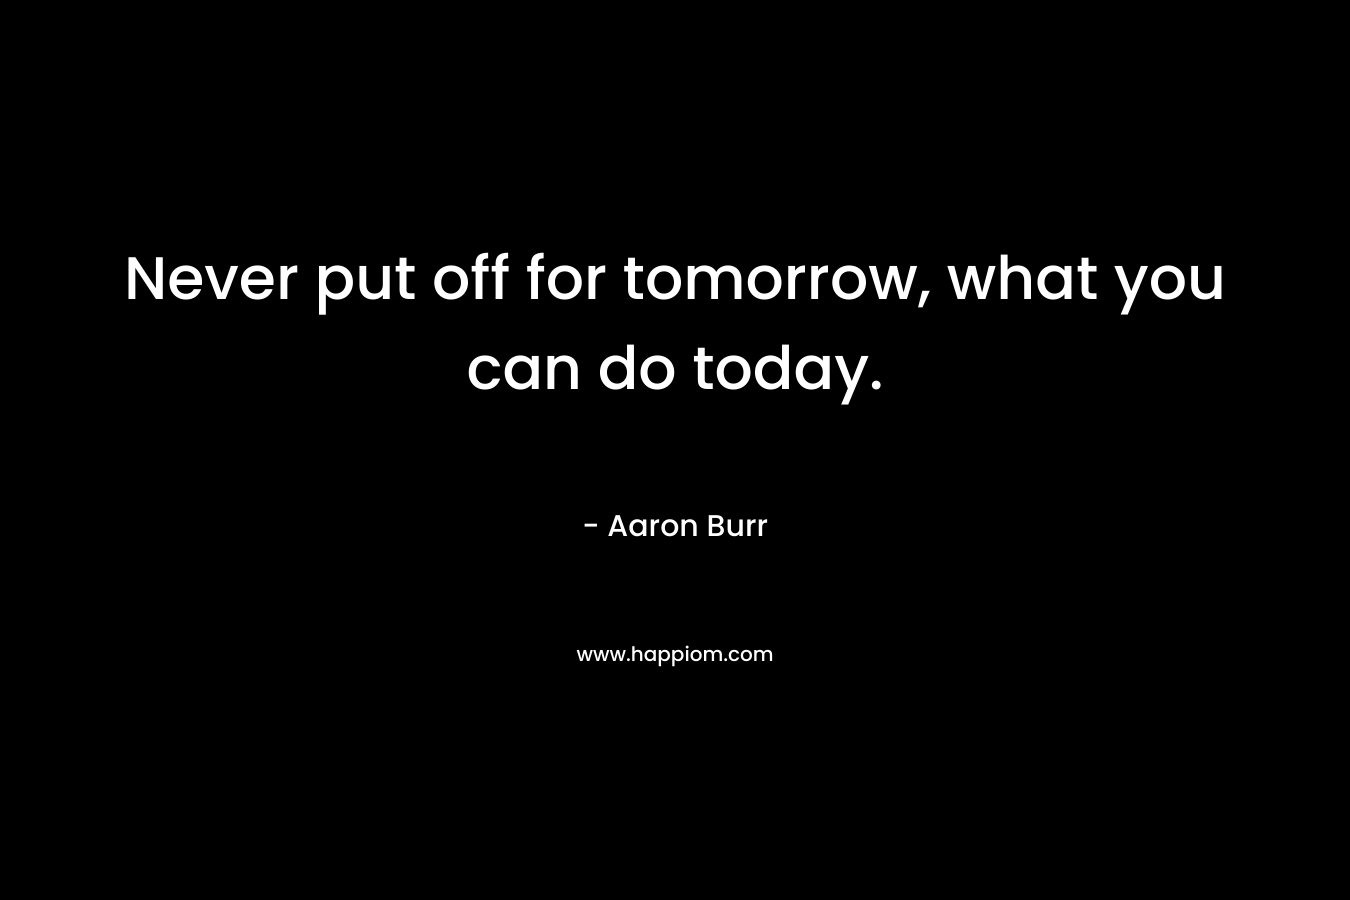 Never put off for tomorrow, what you can do today. – Aaron Burr